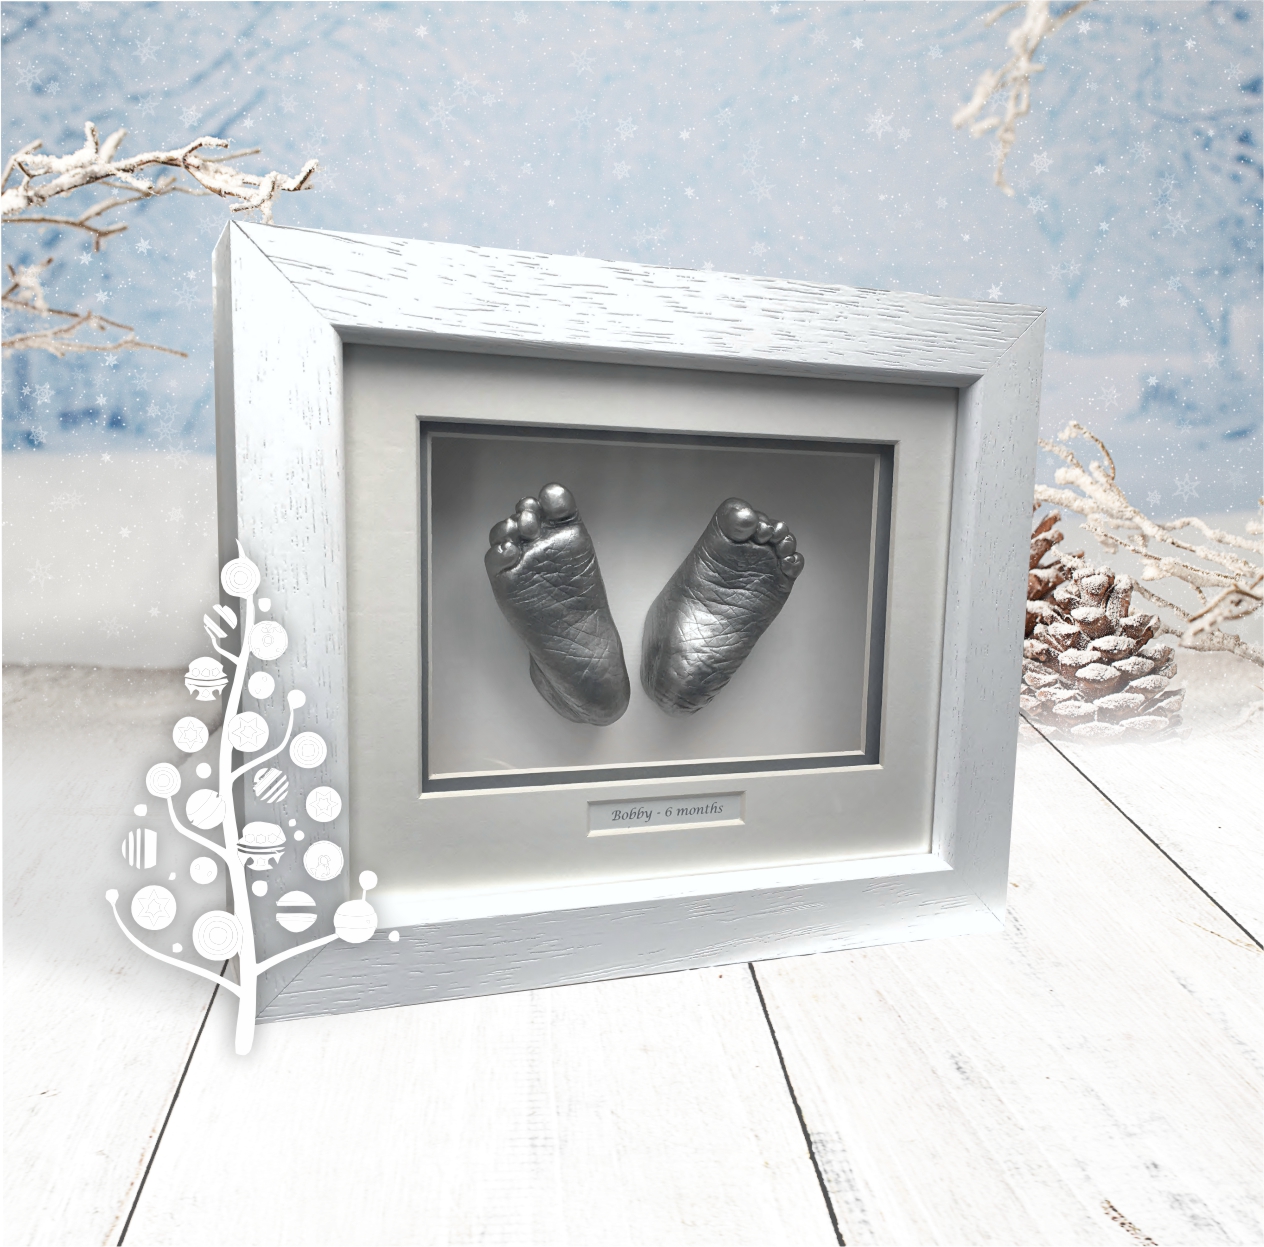 Framed-baby-feet-casts-for-Christmas